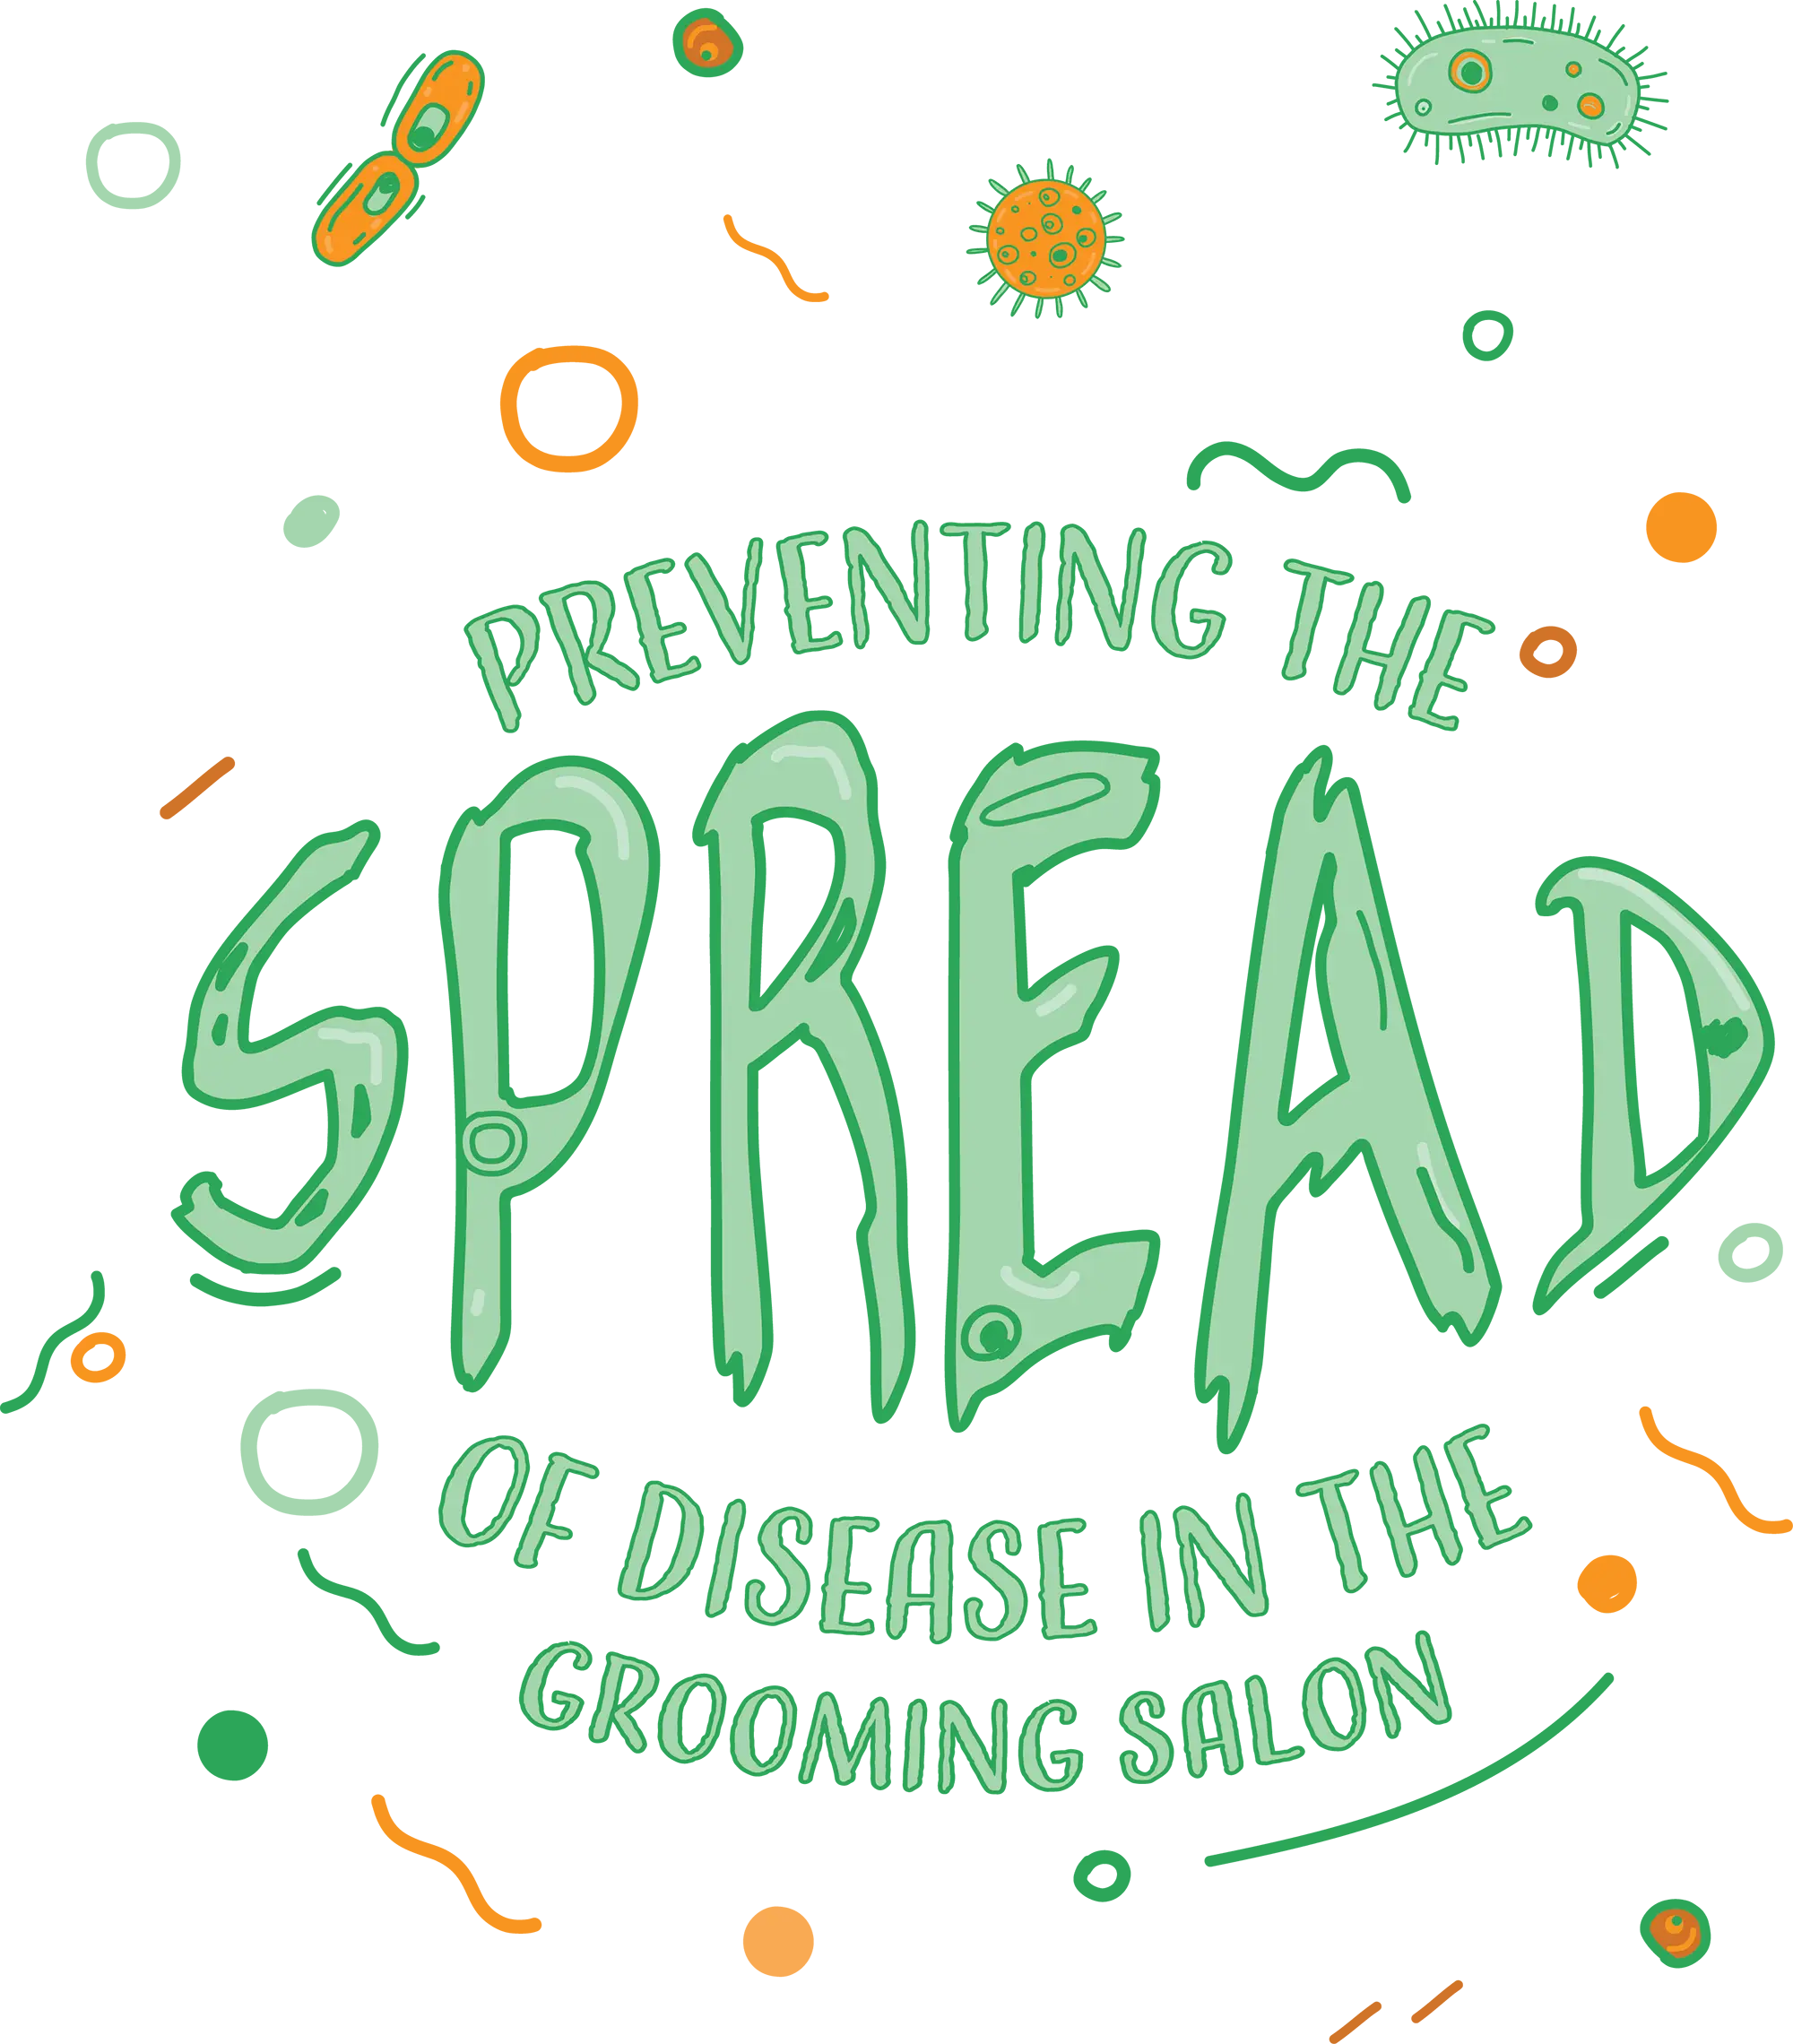 Preventing the Spread of Disease in the Grooming Salon title